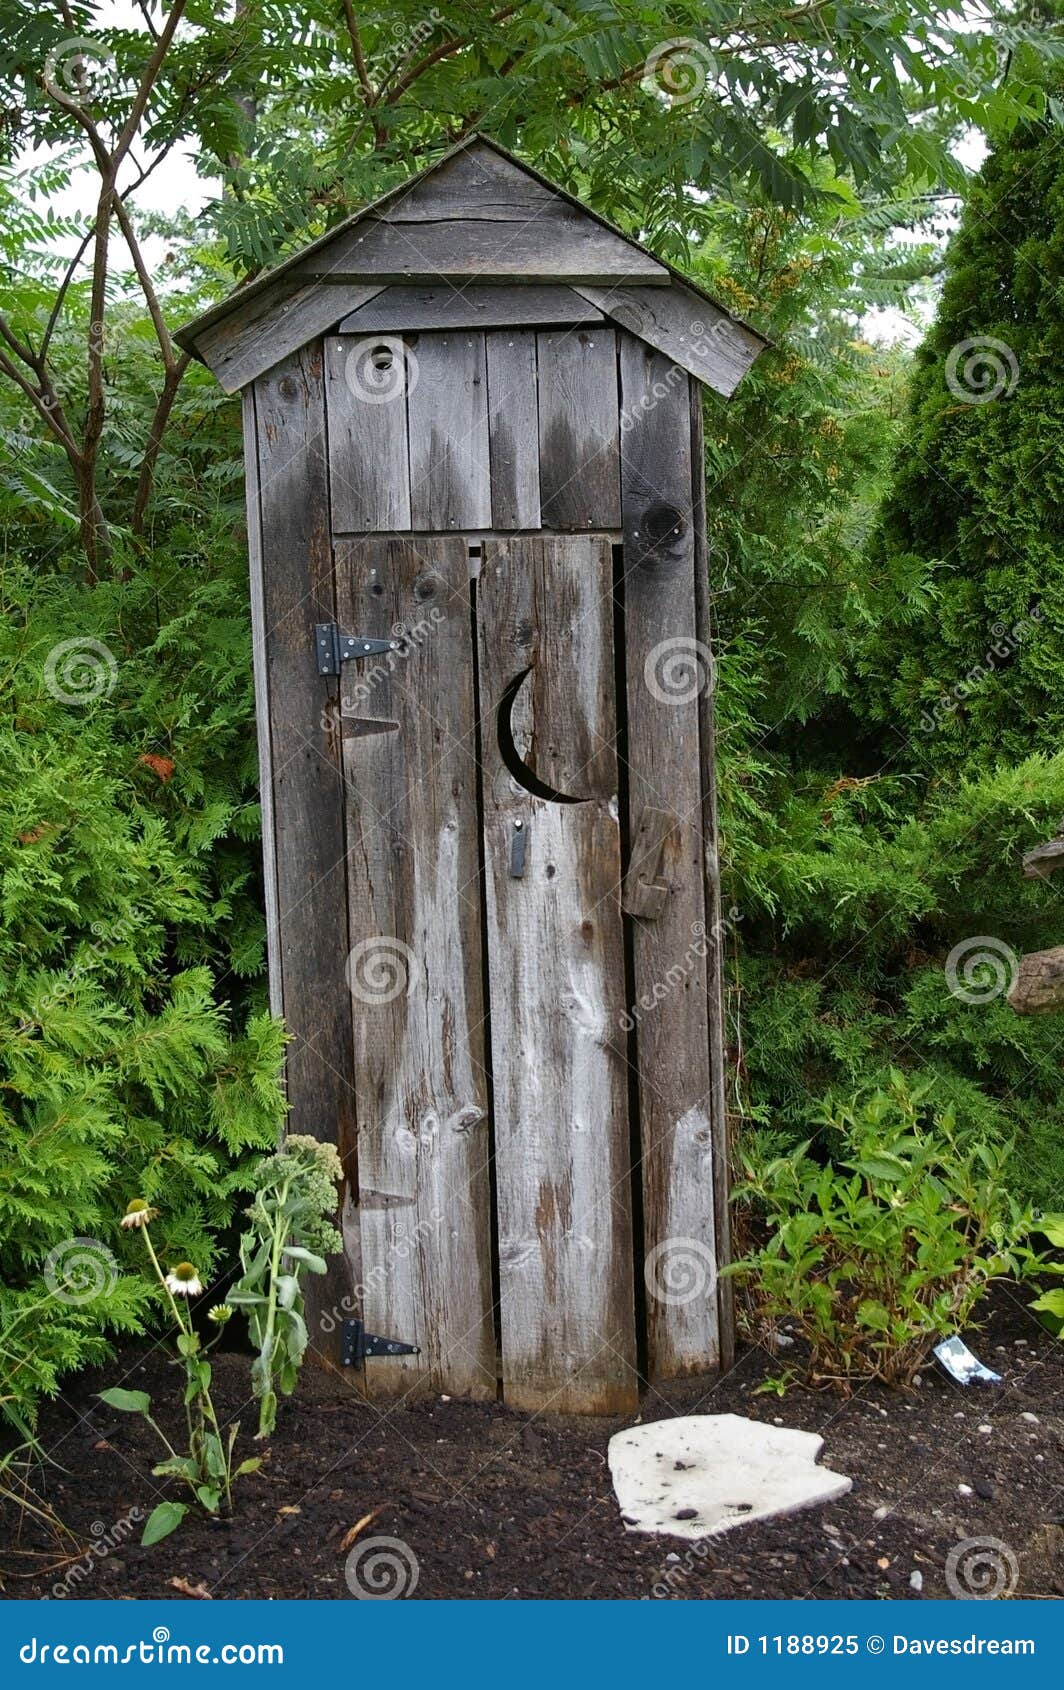 The Outhouse stock image. Image of moon, soil, garden 